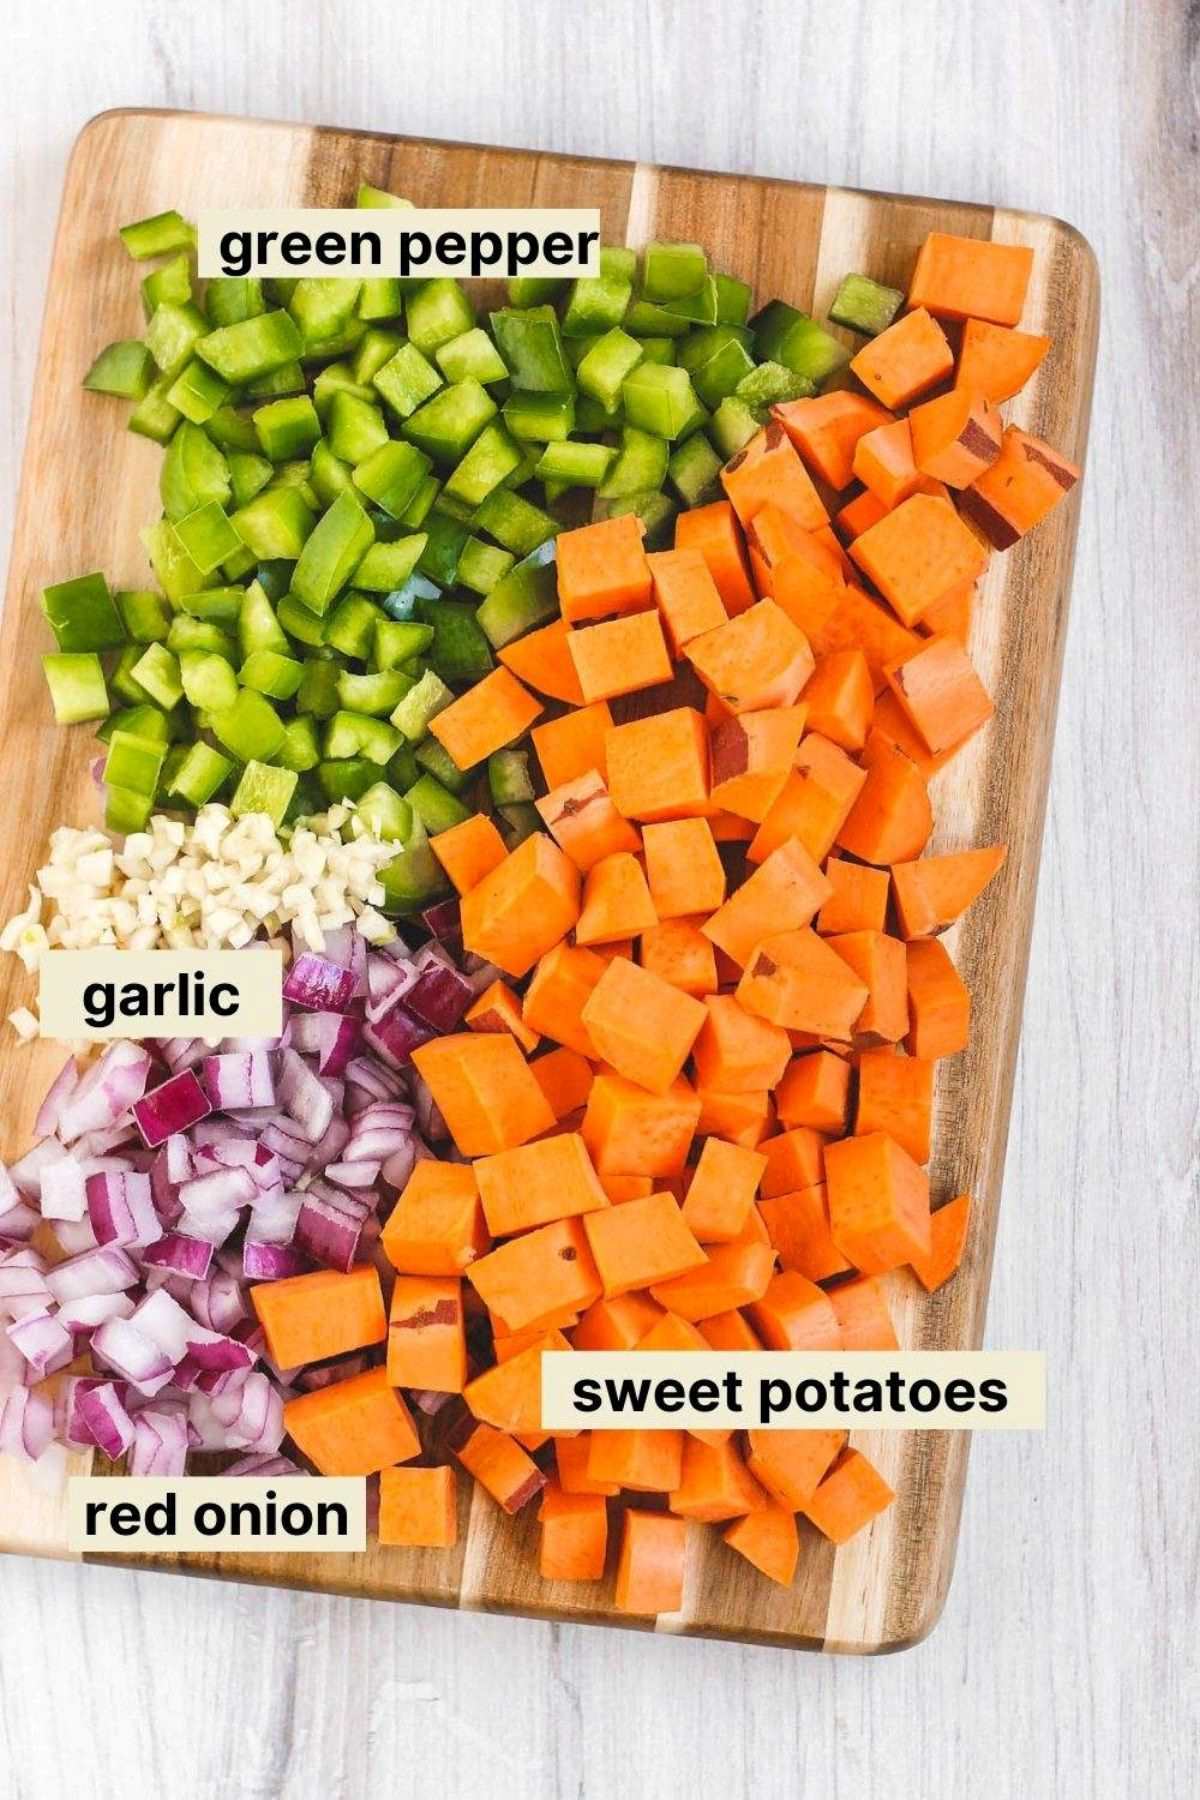 Chopped veggies and garlic on a cutting board with labels next to each food item.